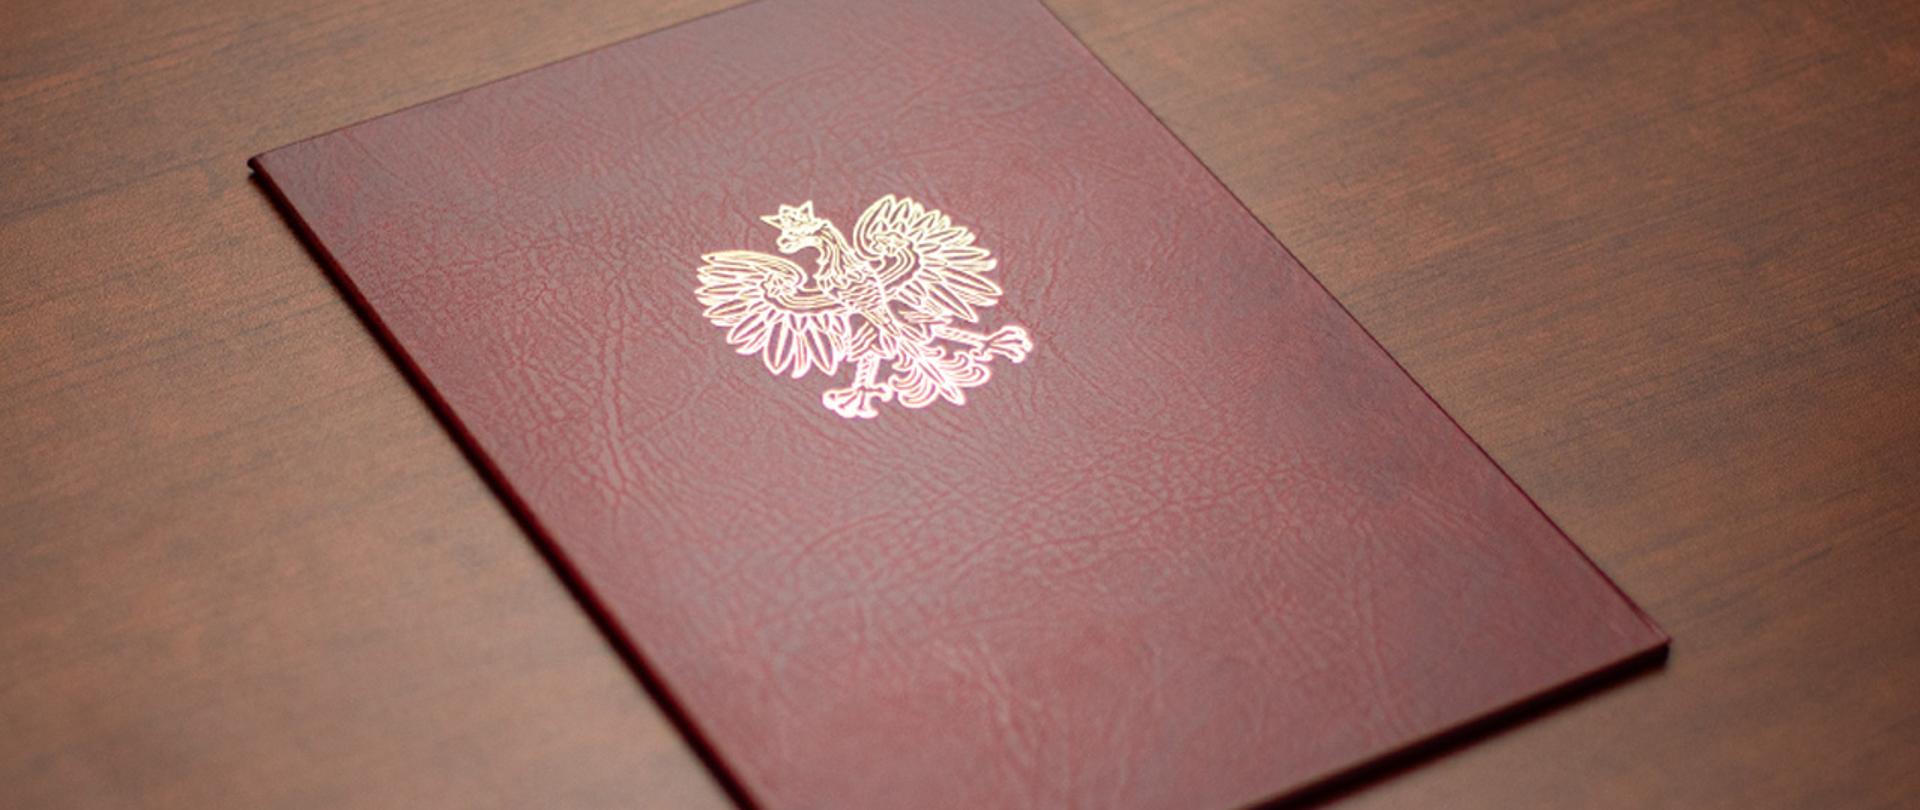 Elegant file cover with crowned eagle.